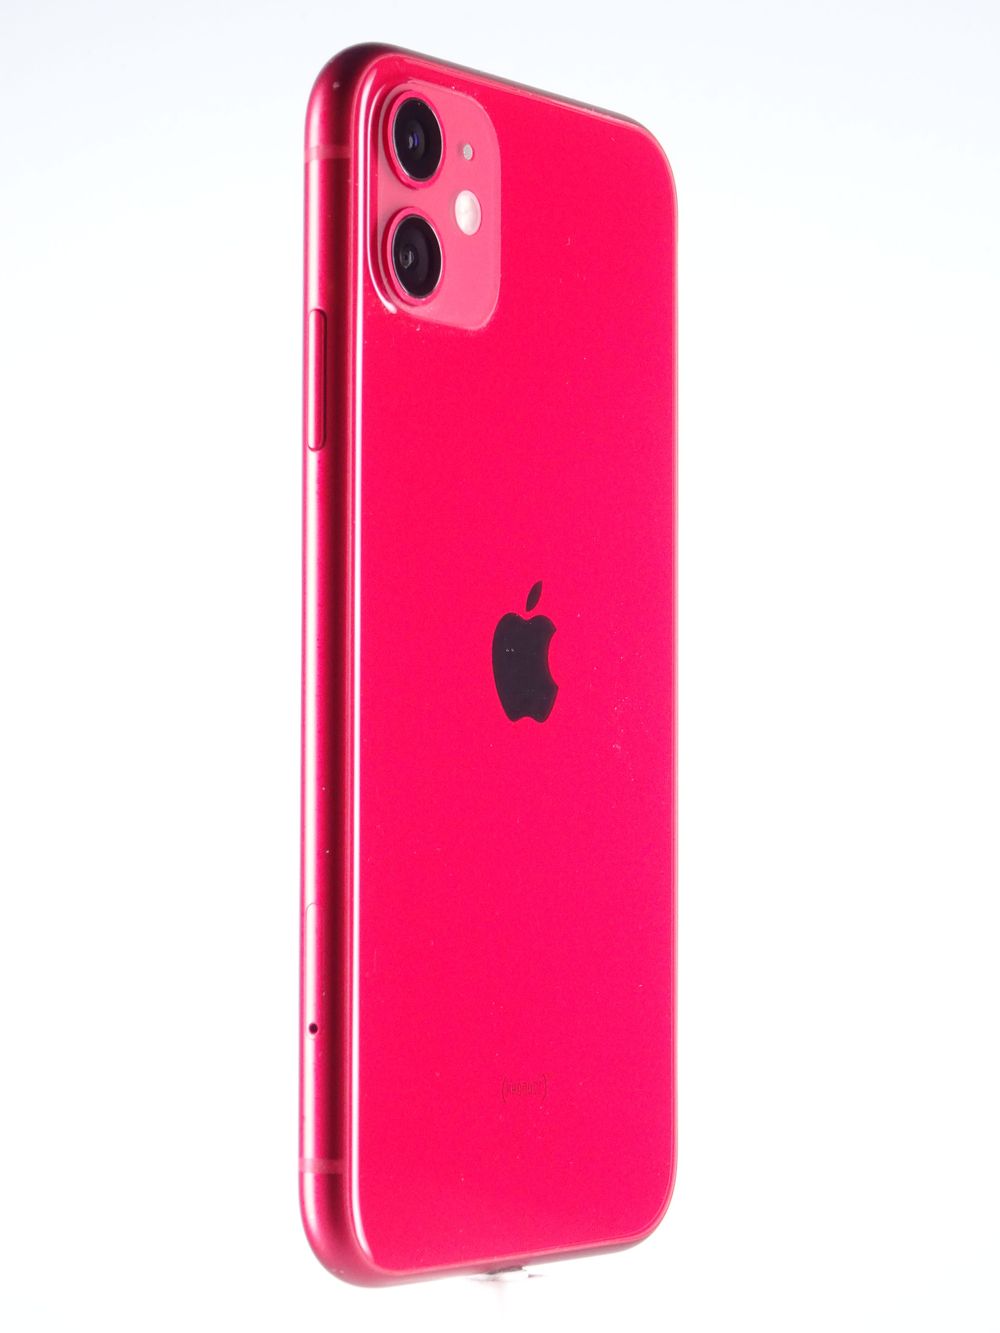 Telefon mobil Apple iPhone 11, Red, 256 GB,  Excelent